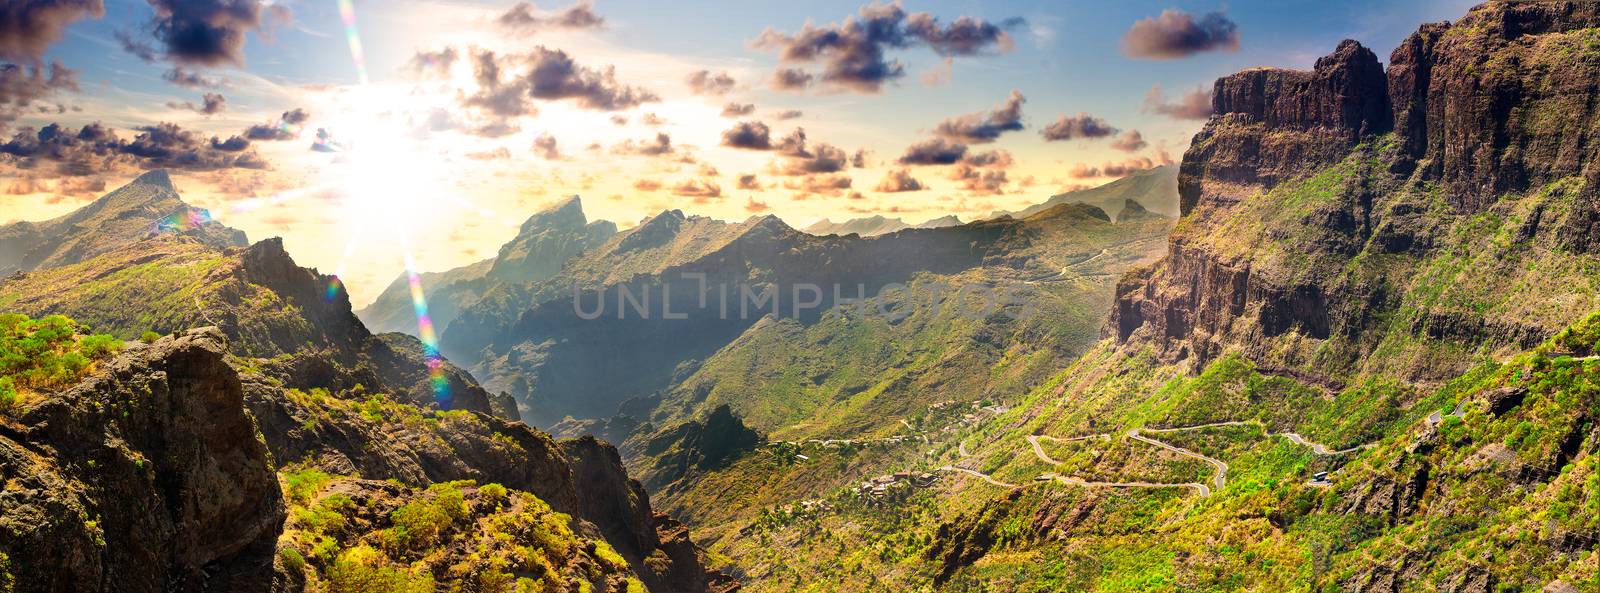 Masca valley.Canary island.Tenerife.Scenic mountain landscape.Cactus,vegetation and sunset panorama in Tenerife